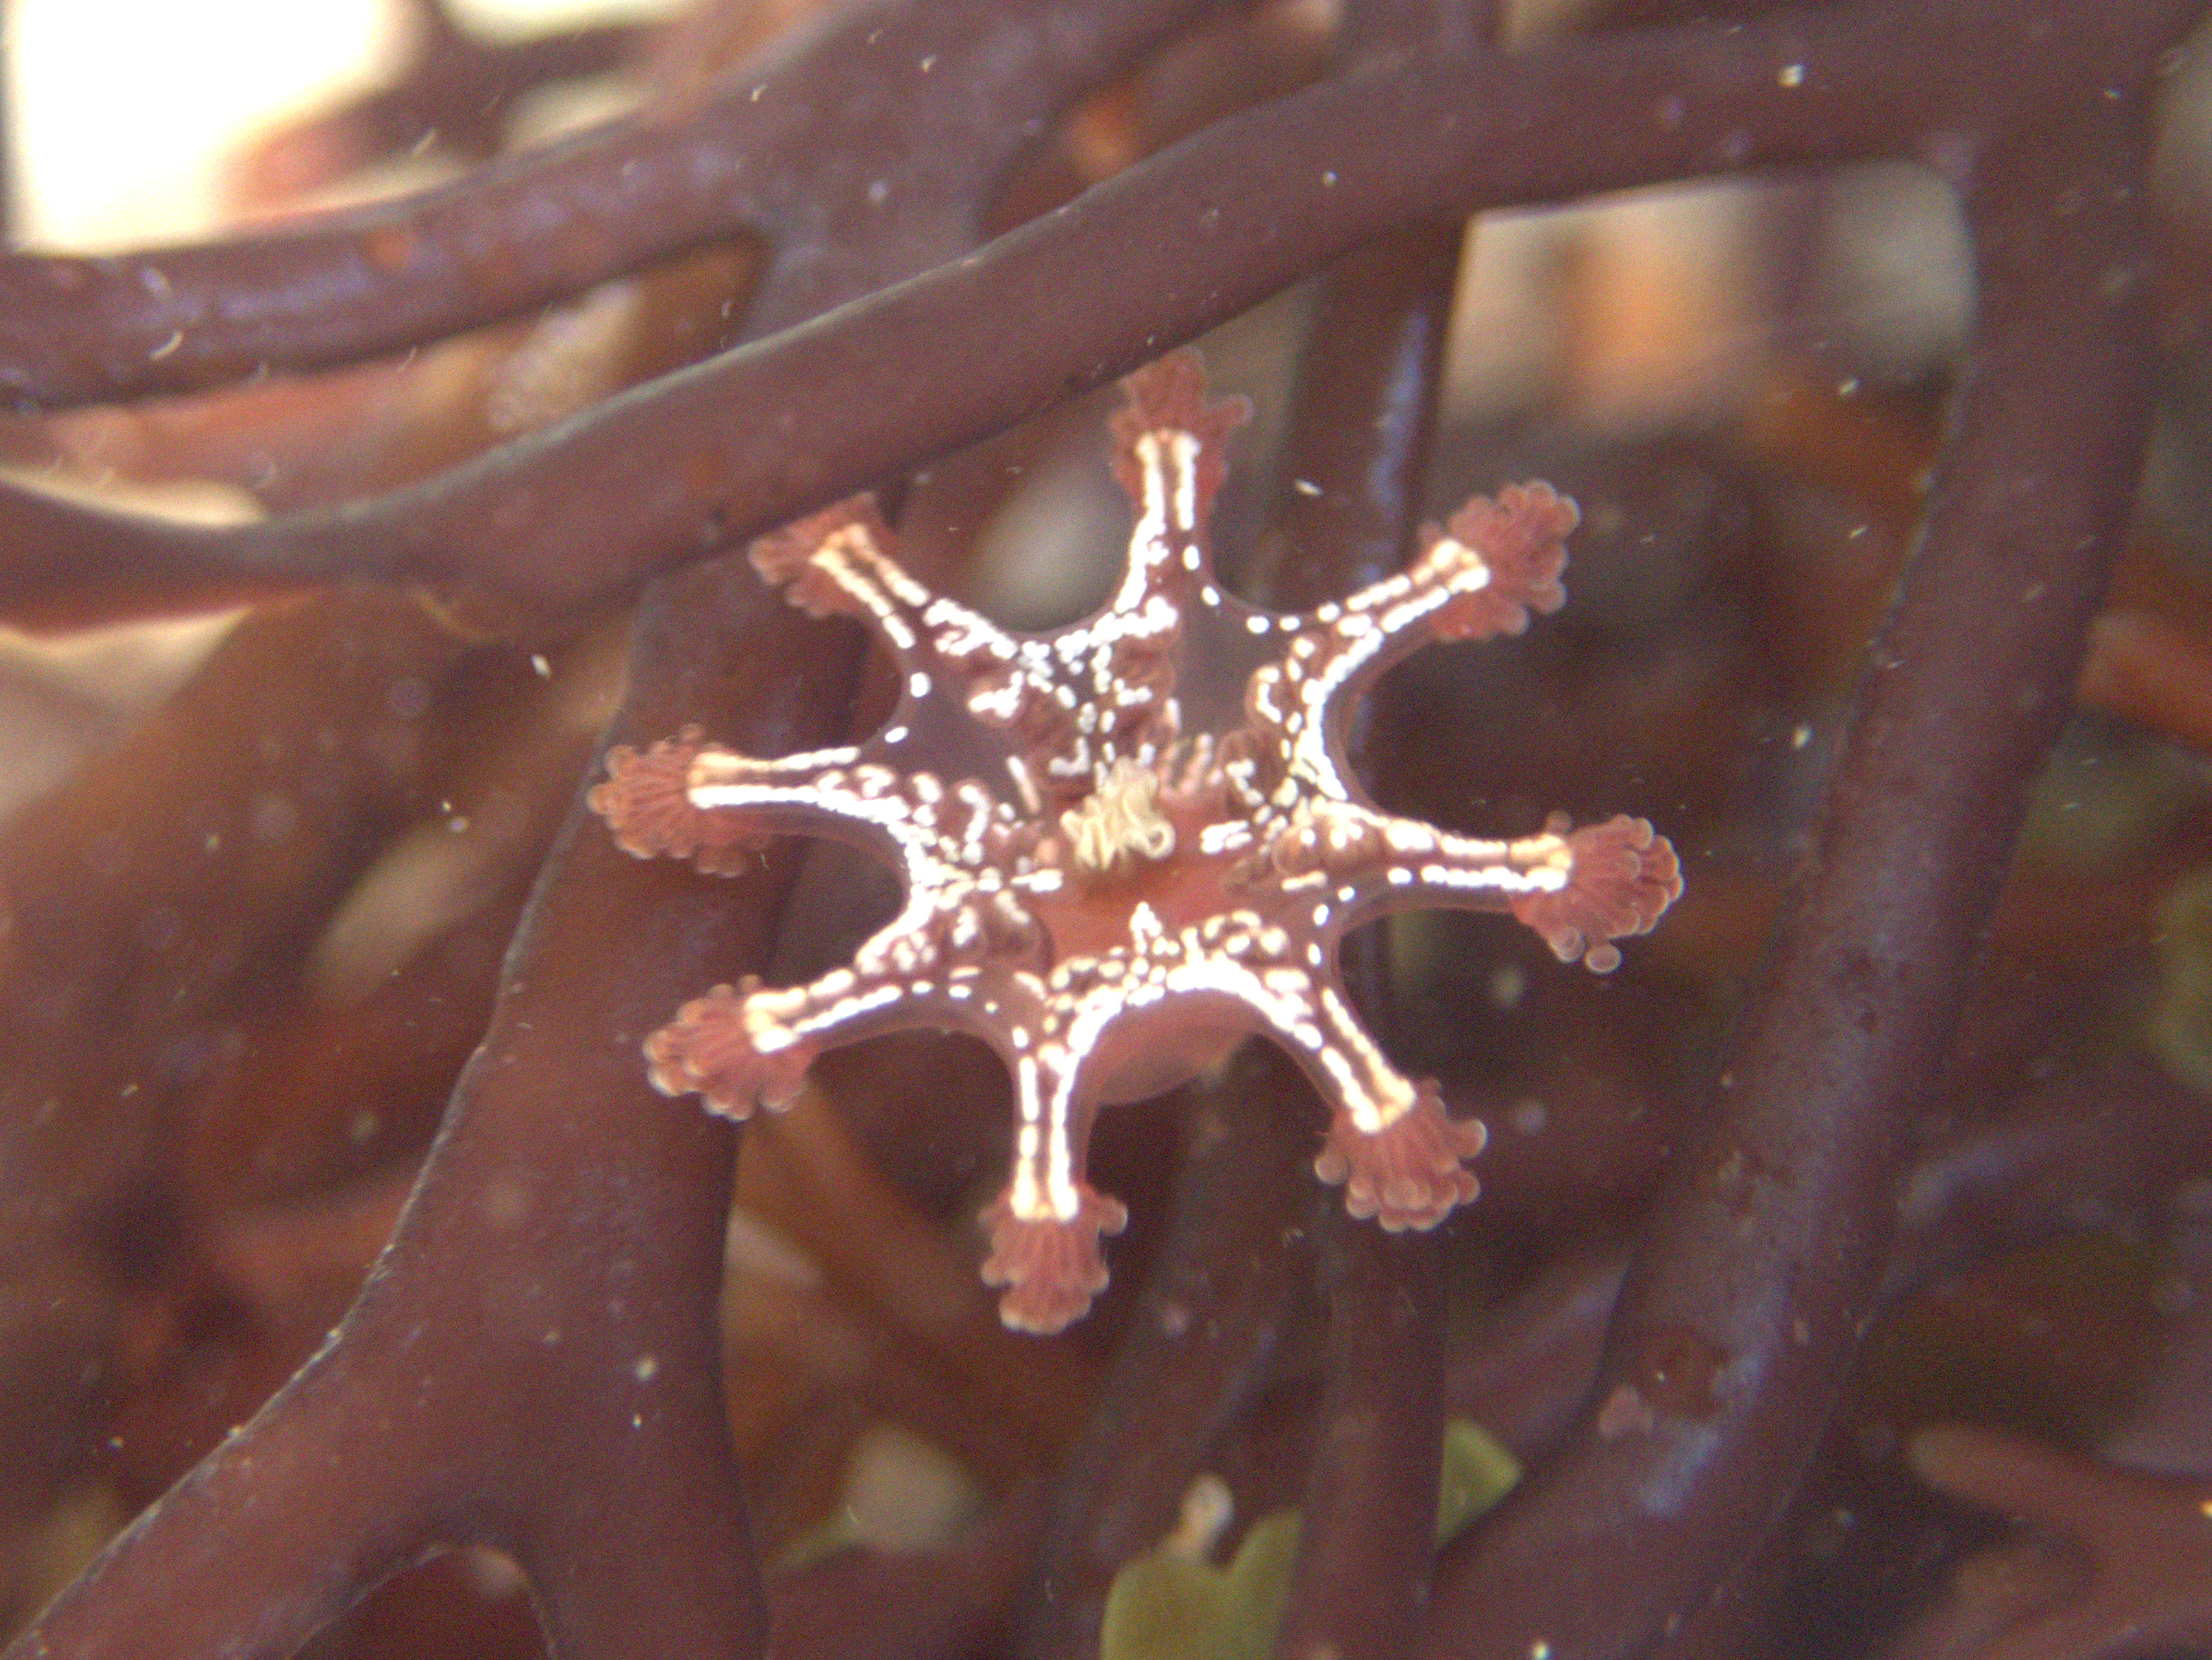 A Calvadosia cruxmelitensis stalked jellyfish near Penzance. The diverse seaweeds of the Mounts Bay area provide a perfect habitat for a variety of stalked jellyfish species.